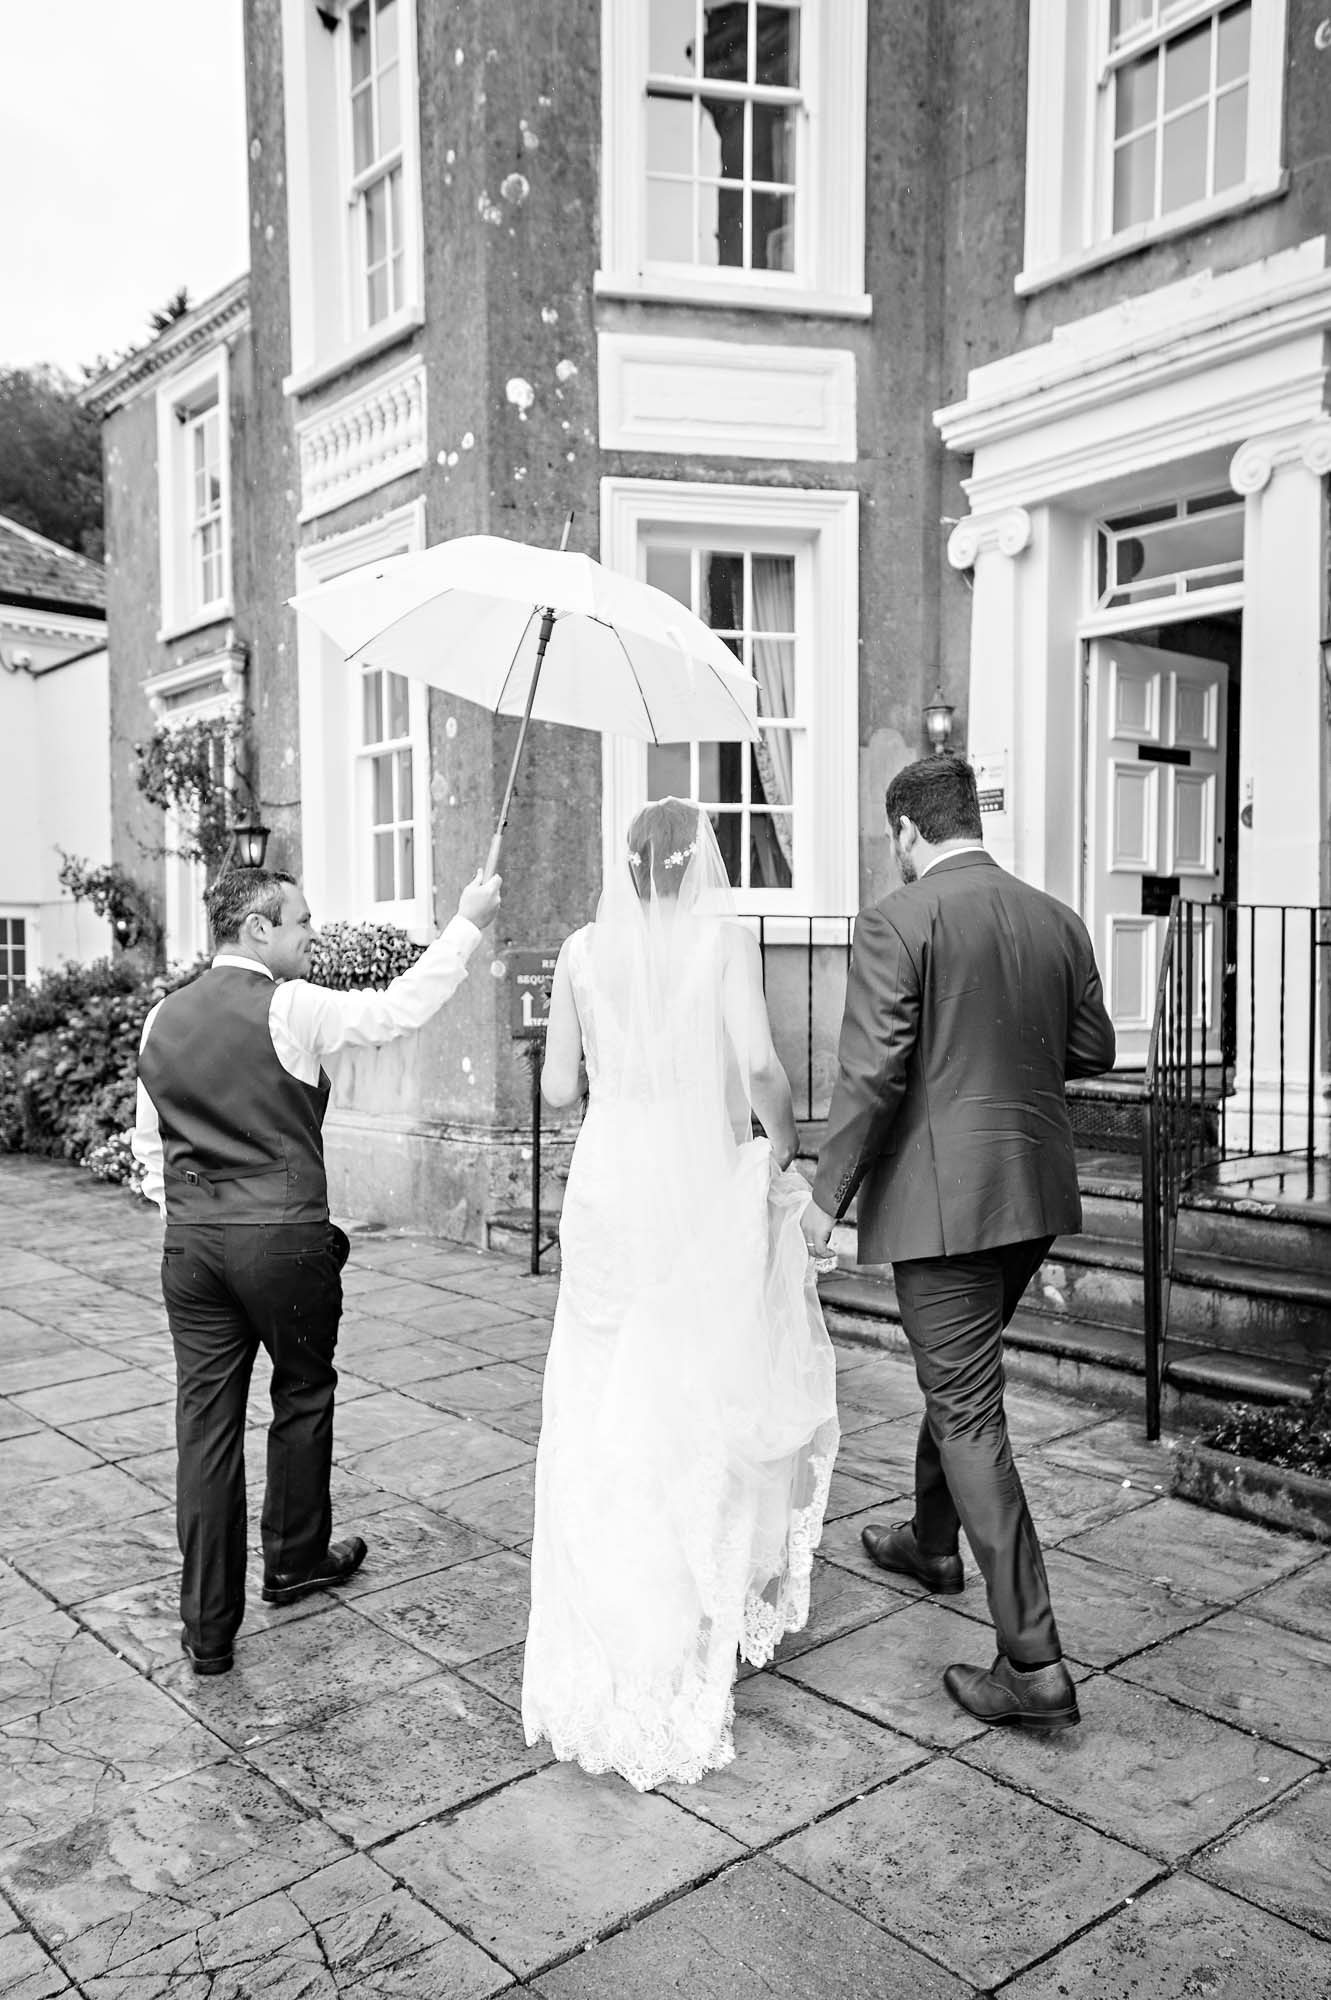 The newly-weds are shown into the New House Country Hotel under umbrella